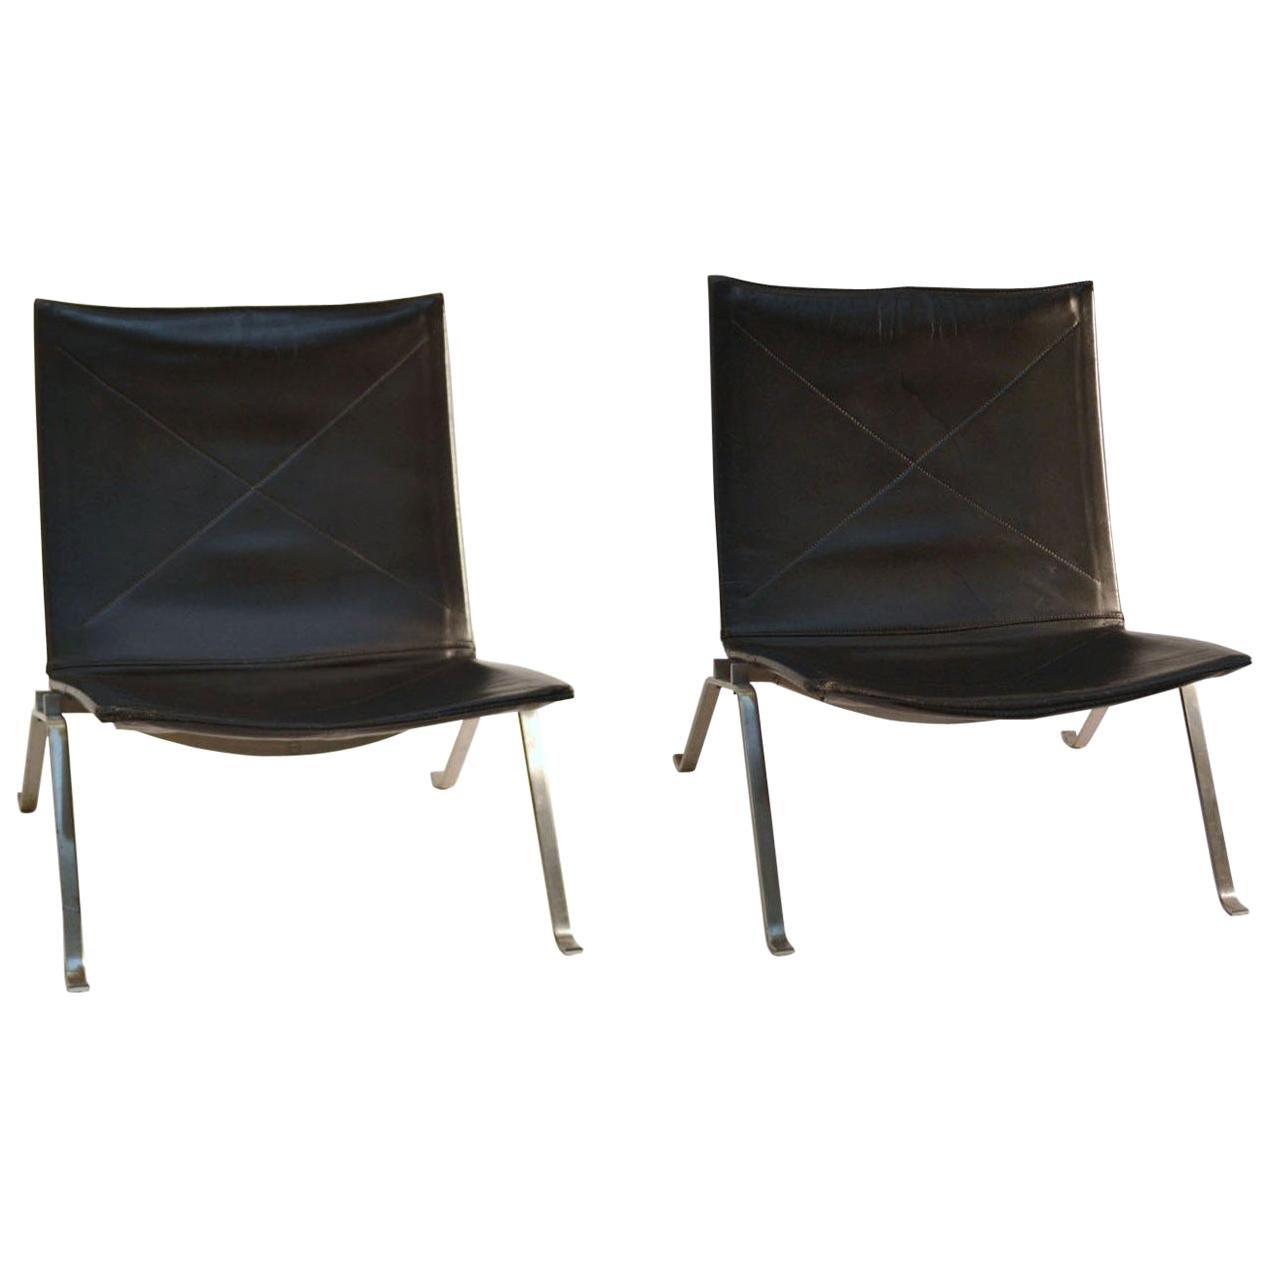 Pair of PK-22 Black Leather Lounge Chairs by Poul Kjaerholm for Fritz Hansen